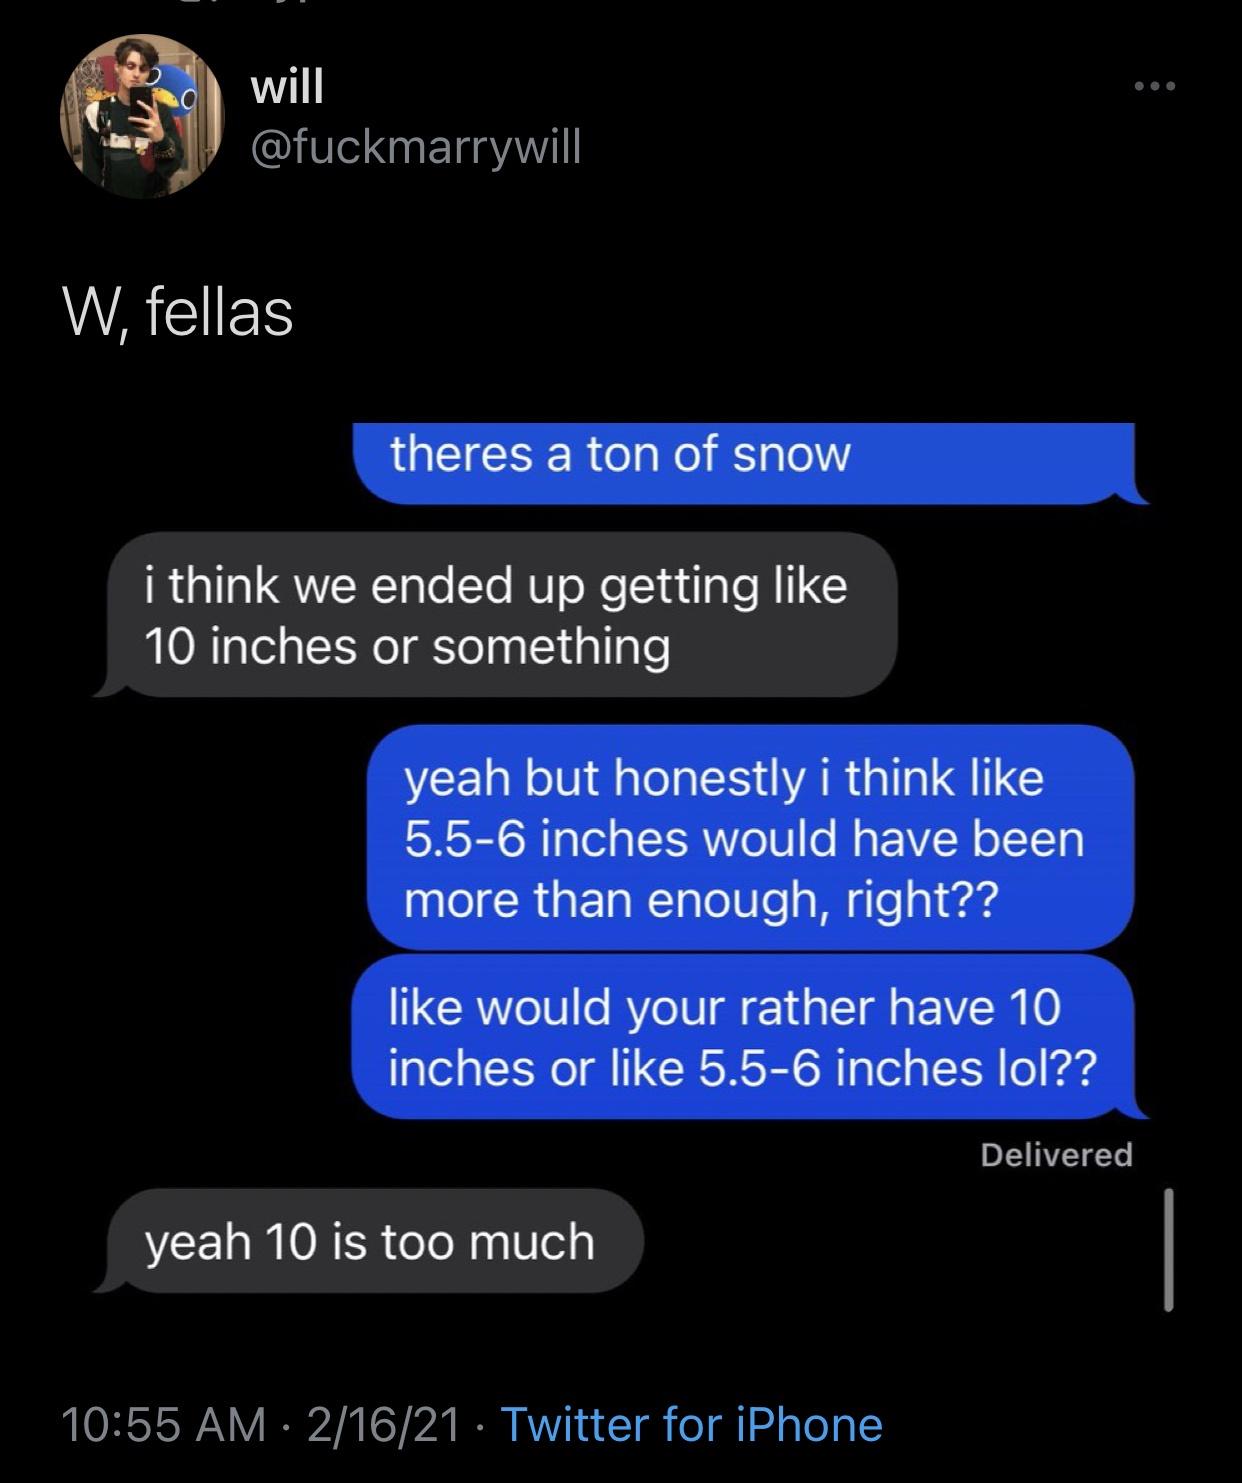 screenshot - will W, fellas theres a ton of snow i think we ended up getting 10 inches or something yeah but honestly i think 5.56 inches would have been more than enough, right?? would your rather have 10 inches or 5.56 inches lol?? Delivered yeah 10 is 